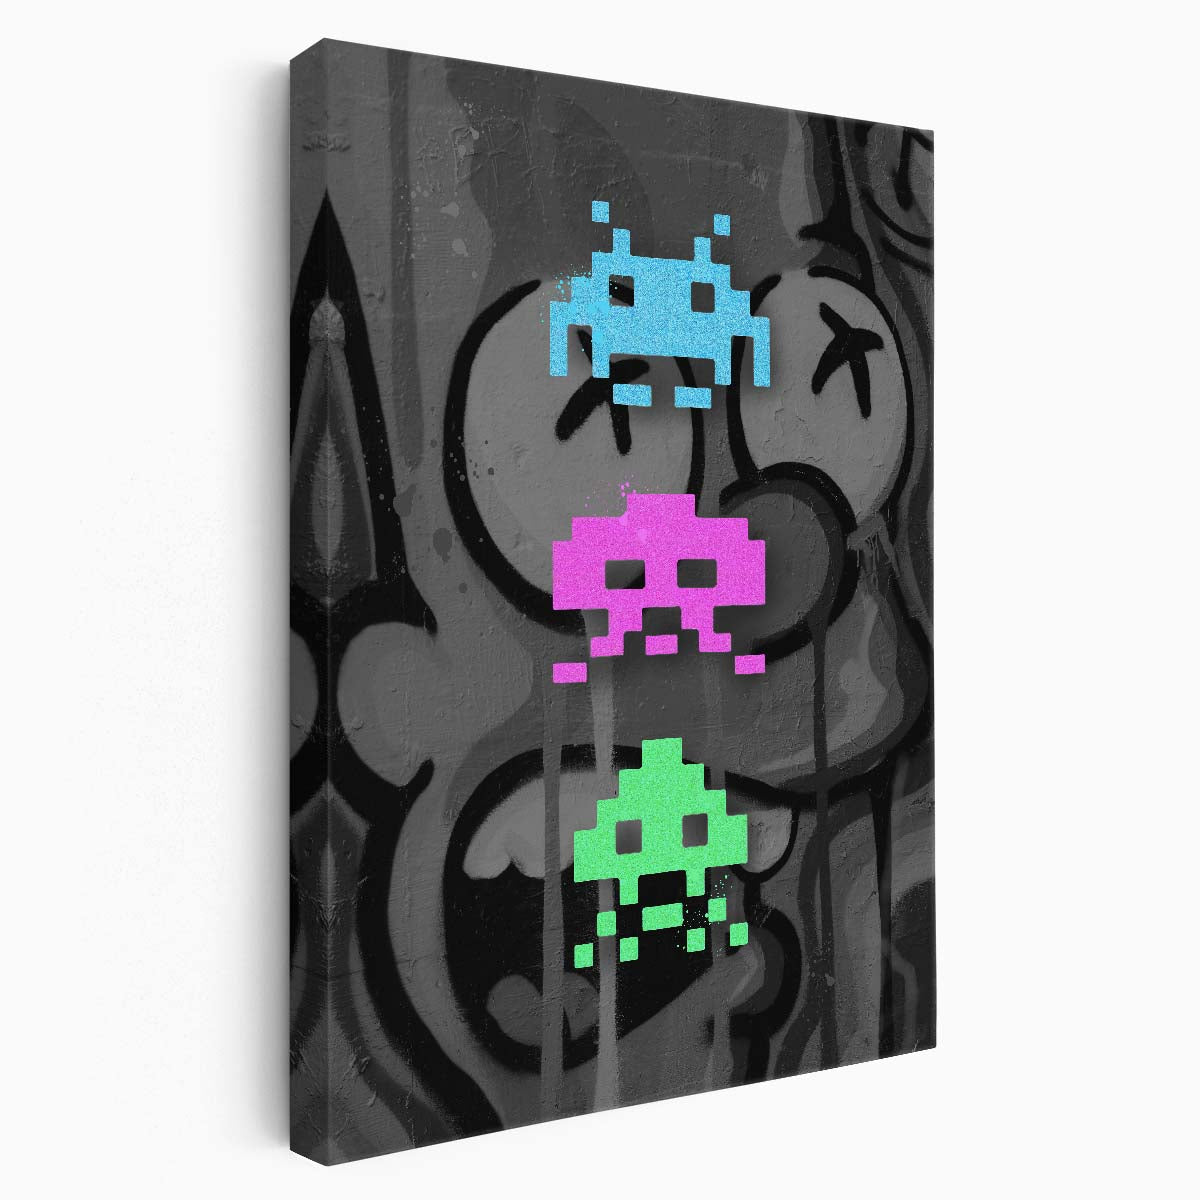 Space Invaders Video Game Wall Art by Luxuriance Designs. Made in USA.